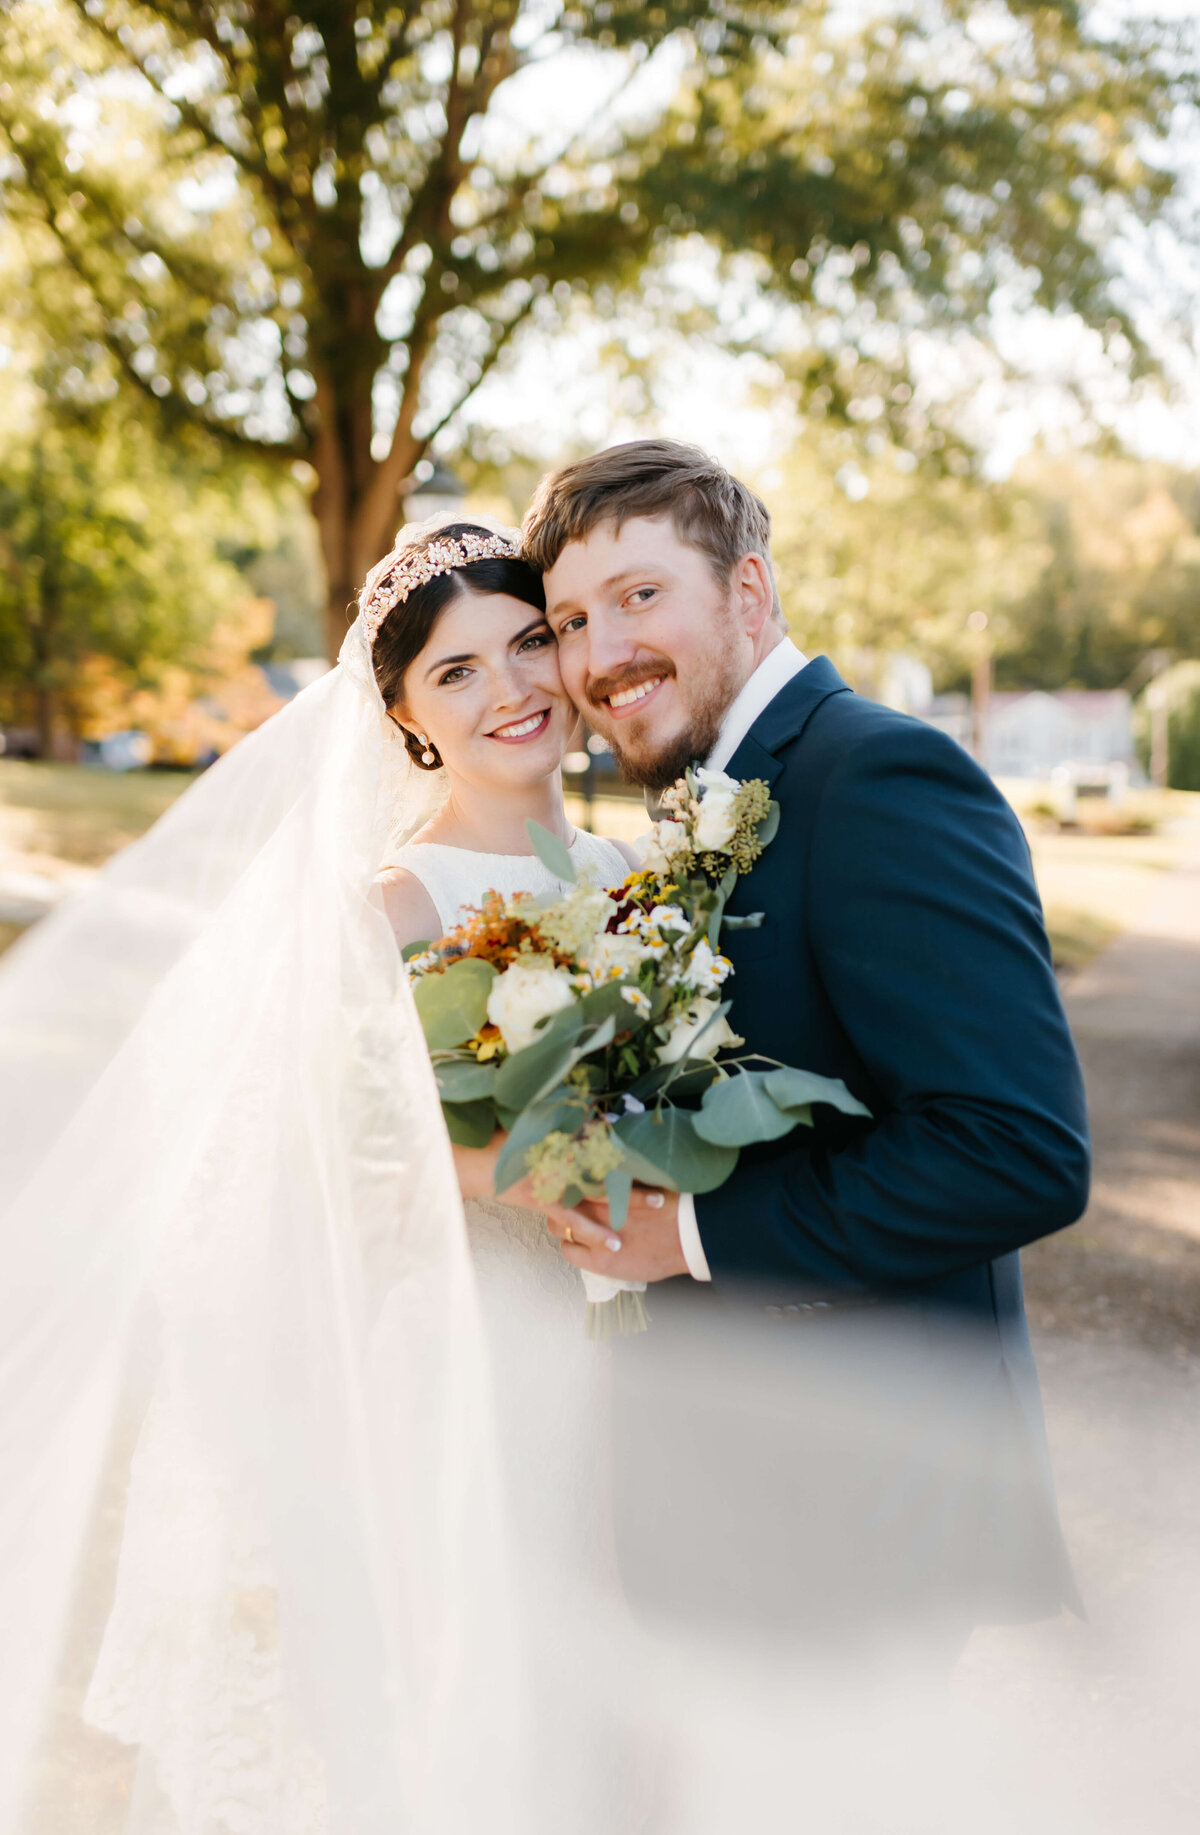 wedding day portrait with bride and groom standing close together with their temples touching and smiling as they both hold onto the bride bouquet and the veil from her head flows in front of them with the sunsetting through the trees behind them captured by Virginia wedding photographer